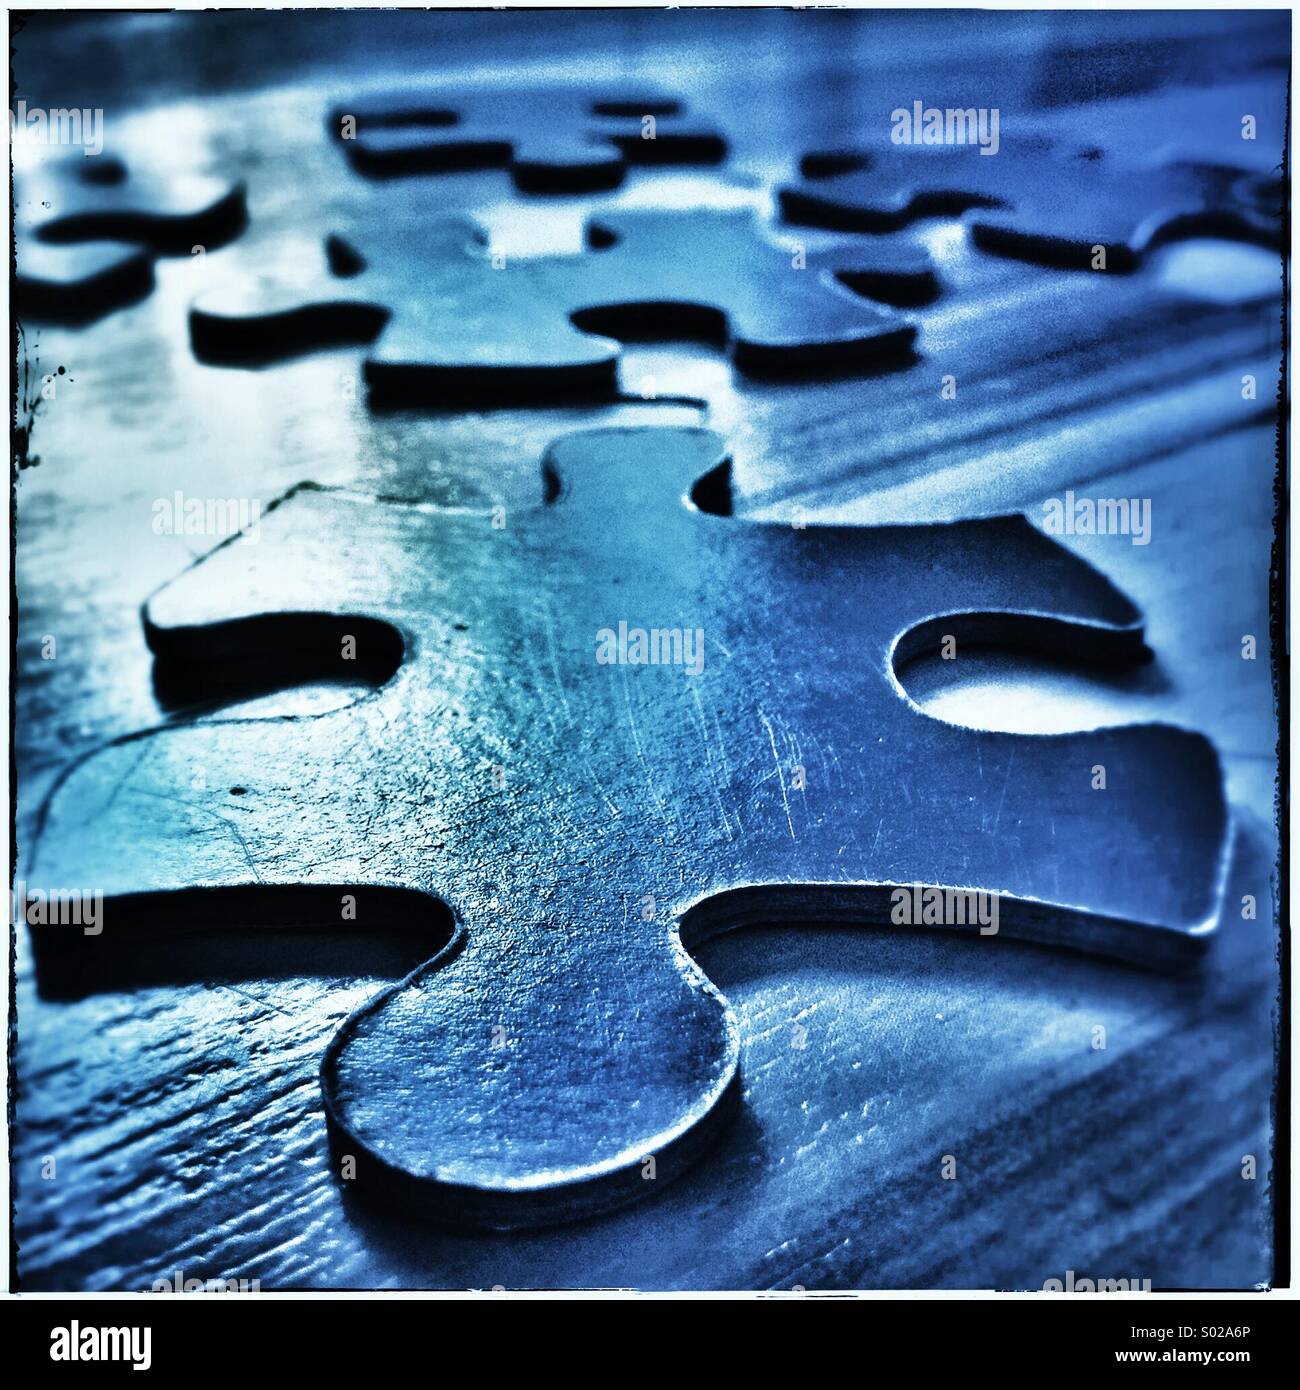 Jigsaw puzzle pieces Stock Photo